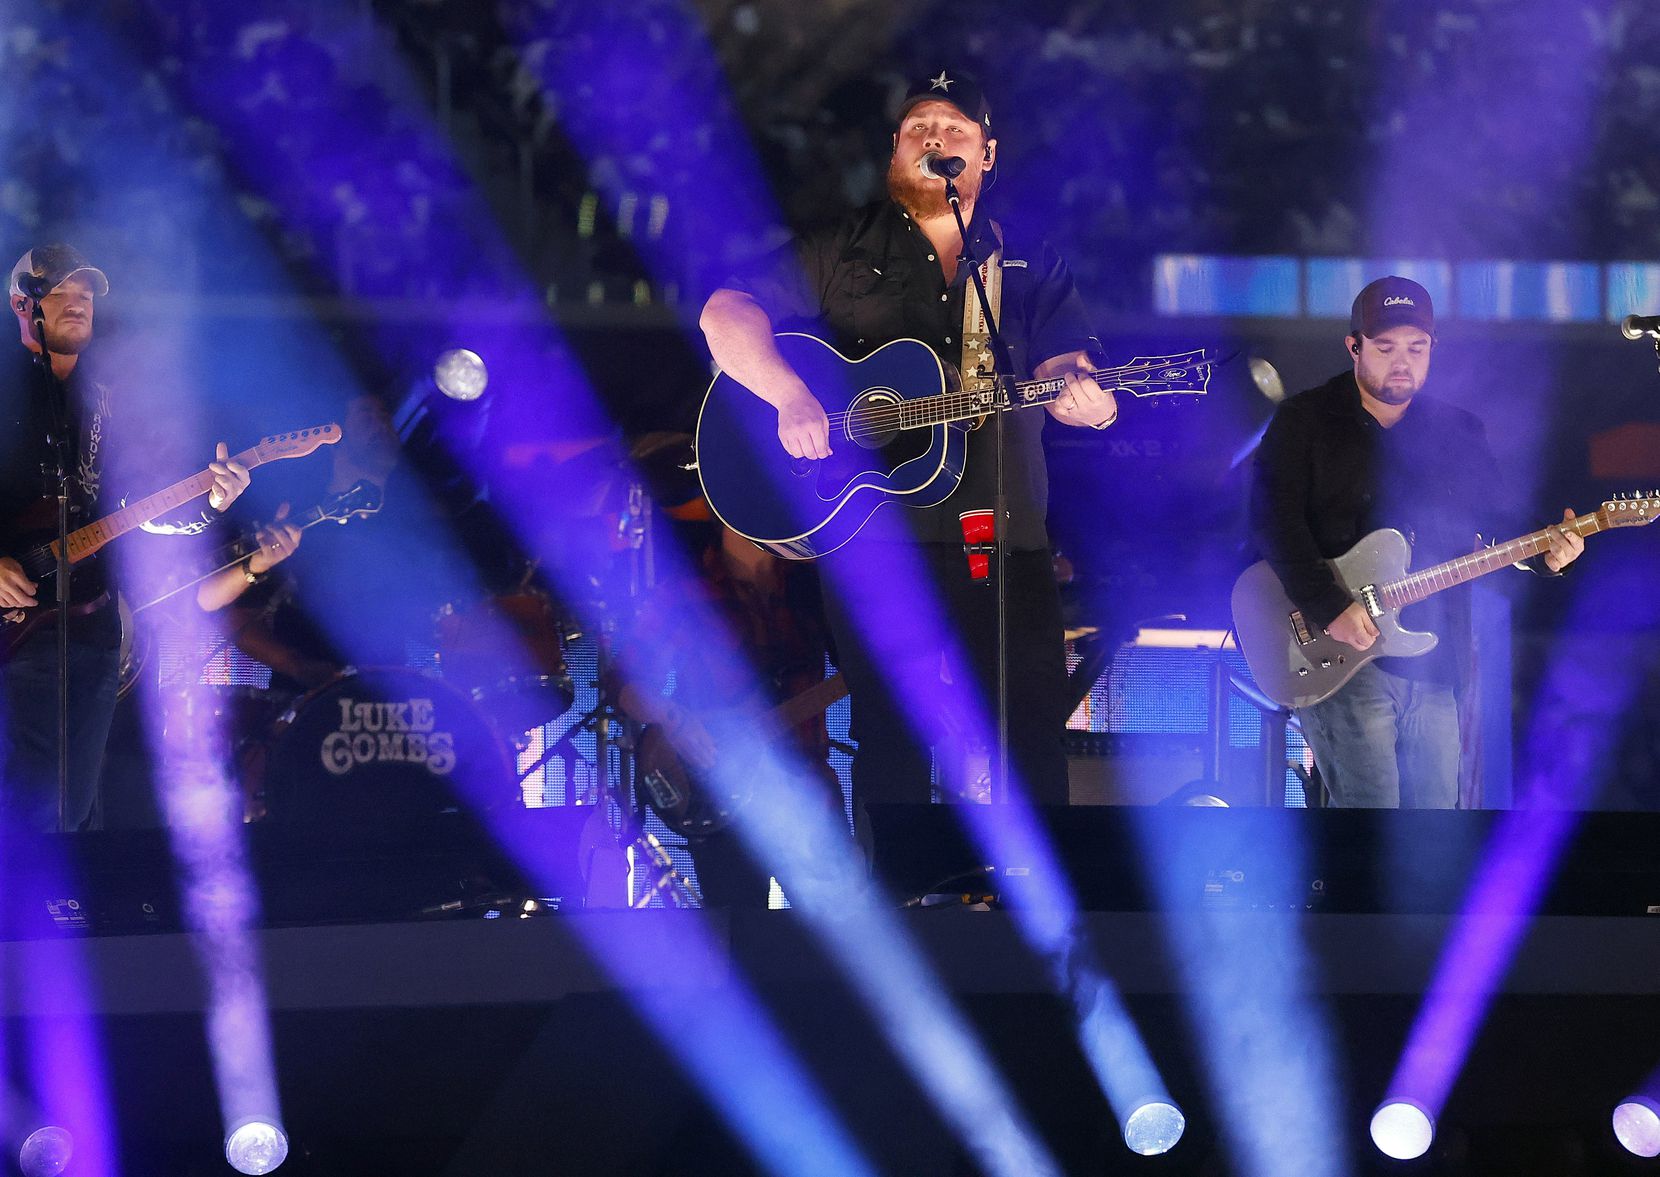 Country artist Luke Combs performs during the halftime show at AT&T Stadium in Arlington, November 25, 2021. The Dallas Cowboys were facing the Las Vegas Raiders in the Thanksgiving Day game. (Tom Fox/The Dallas Morning News)